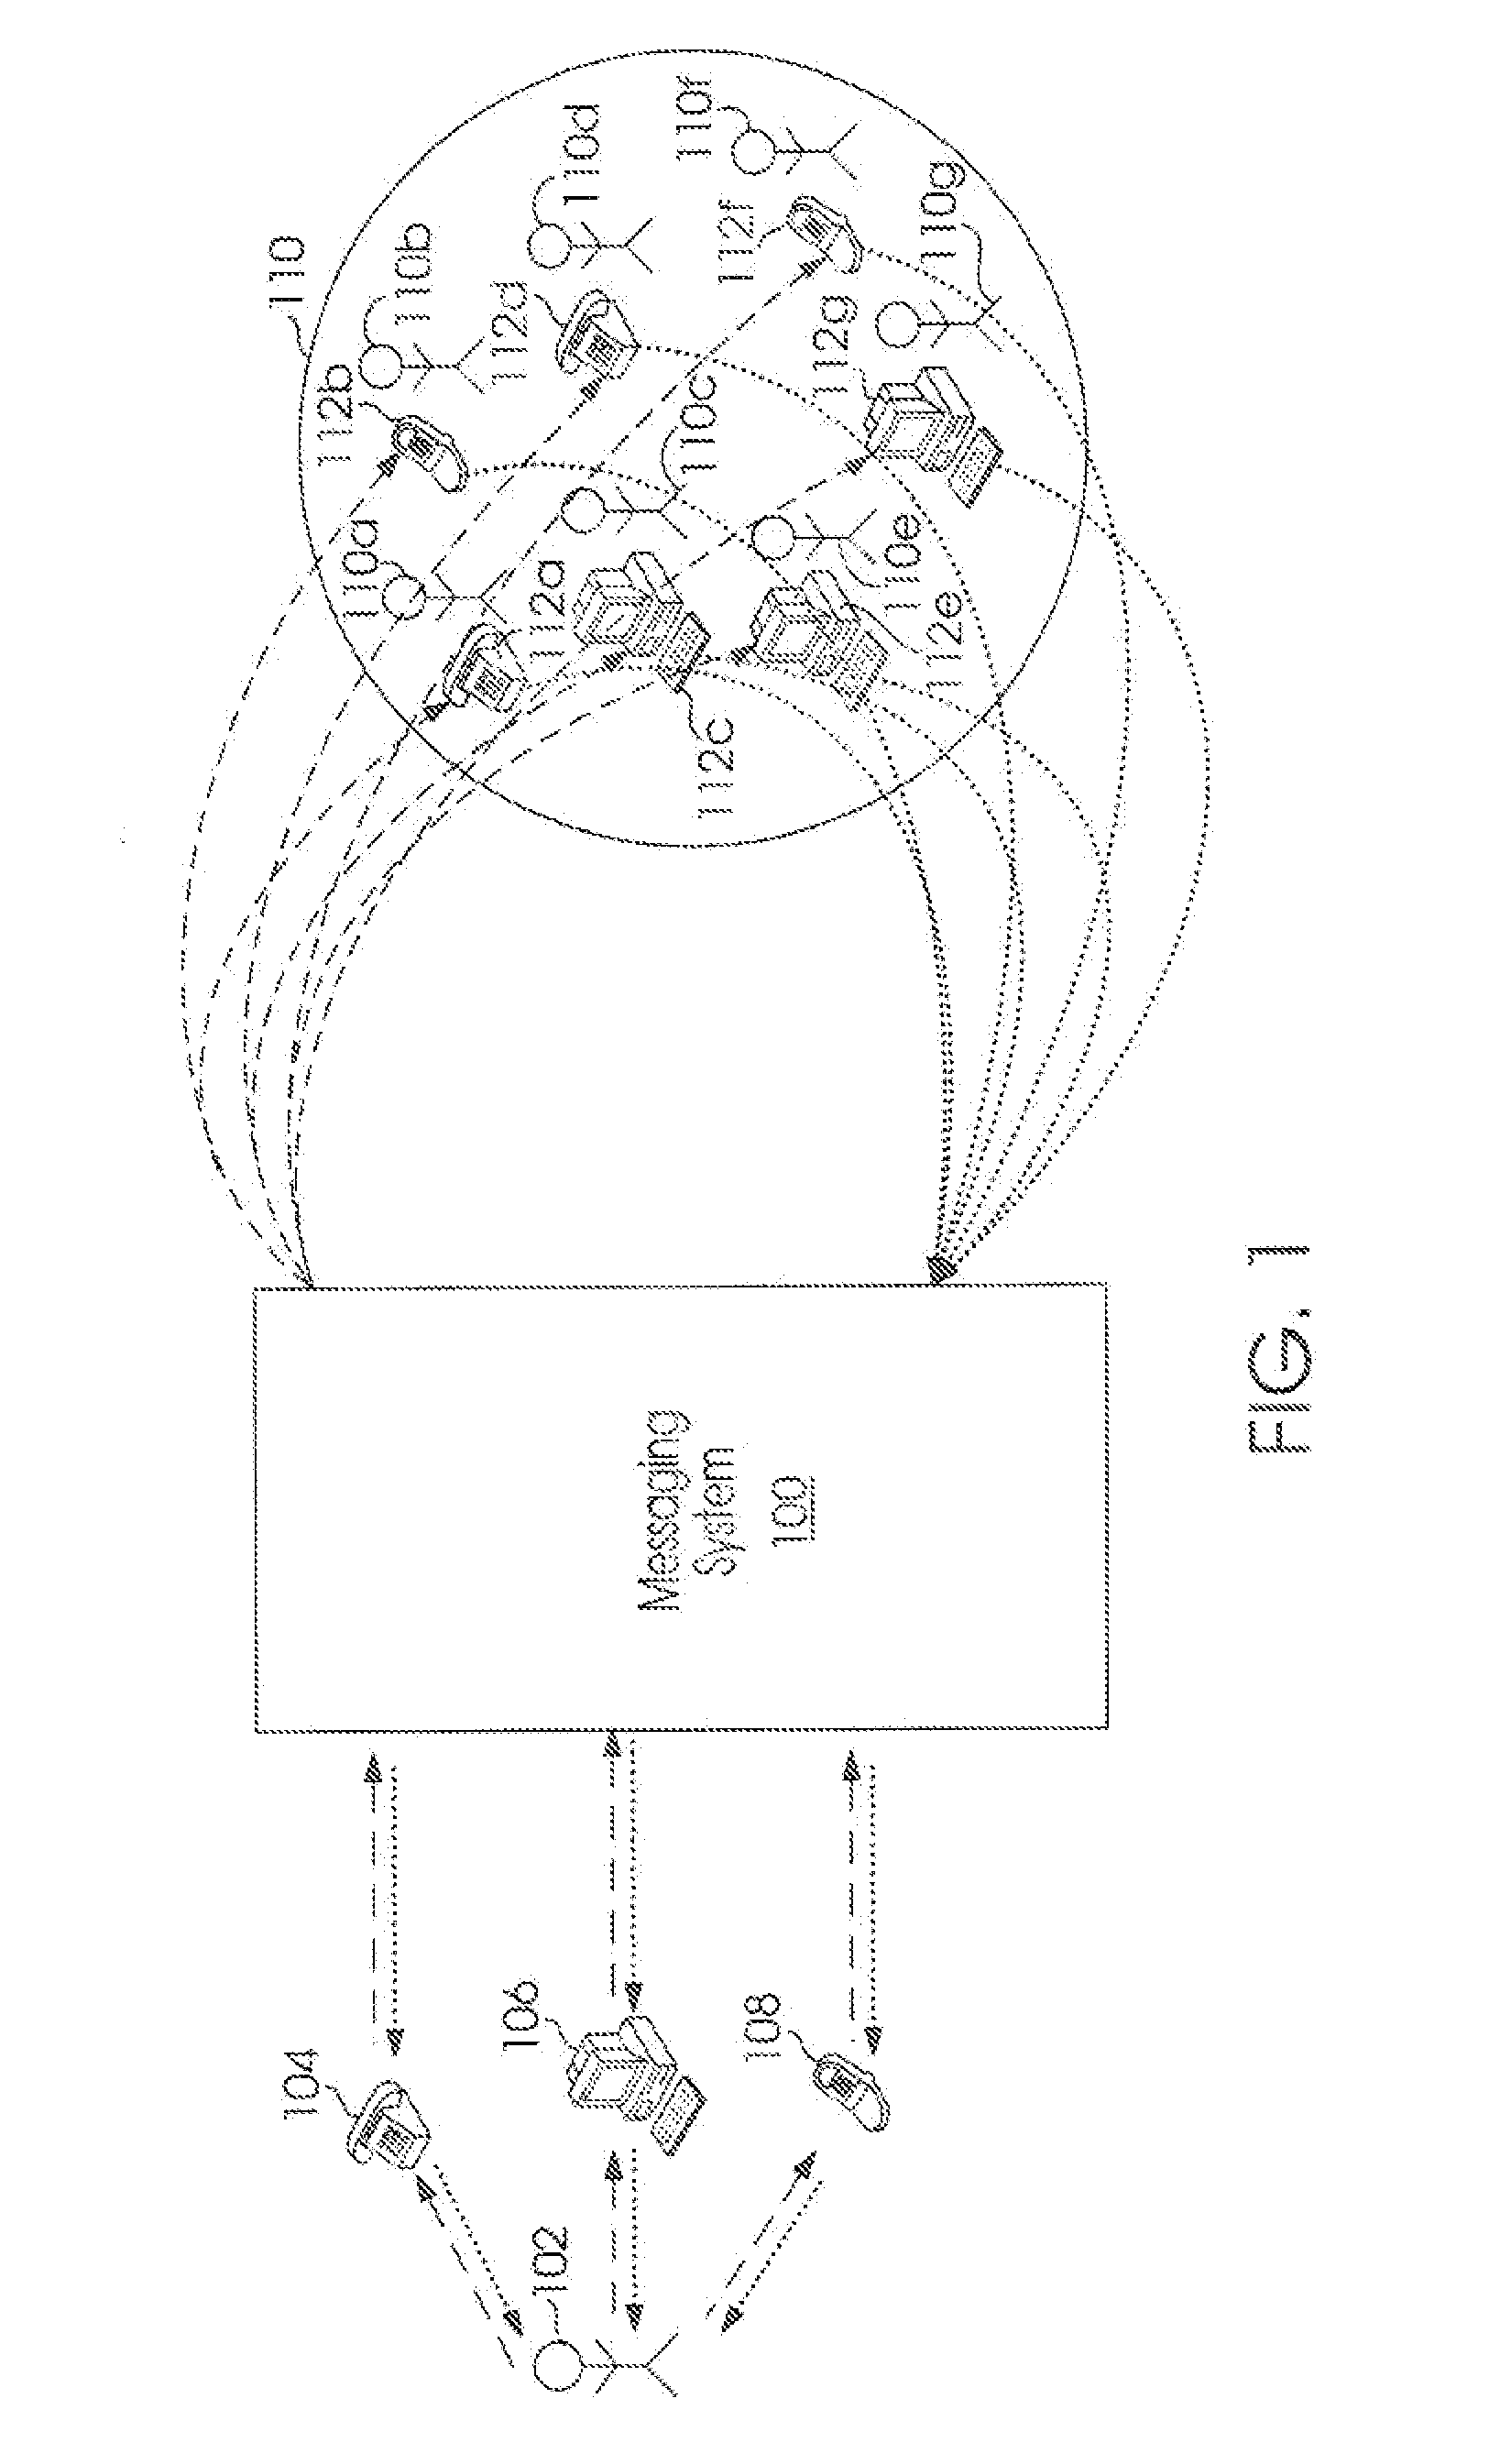 System and Method for Providing Communications to a Group of Recipients Across Multiple Communication Platform Types